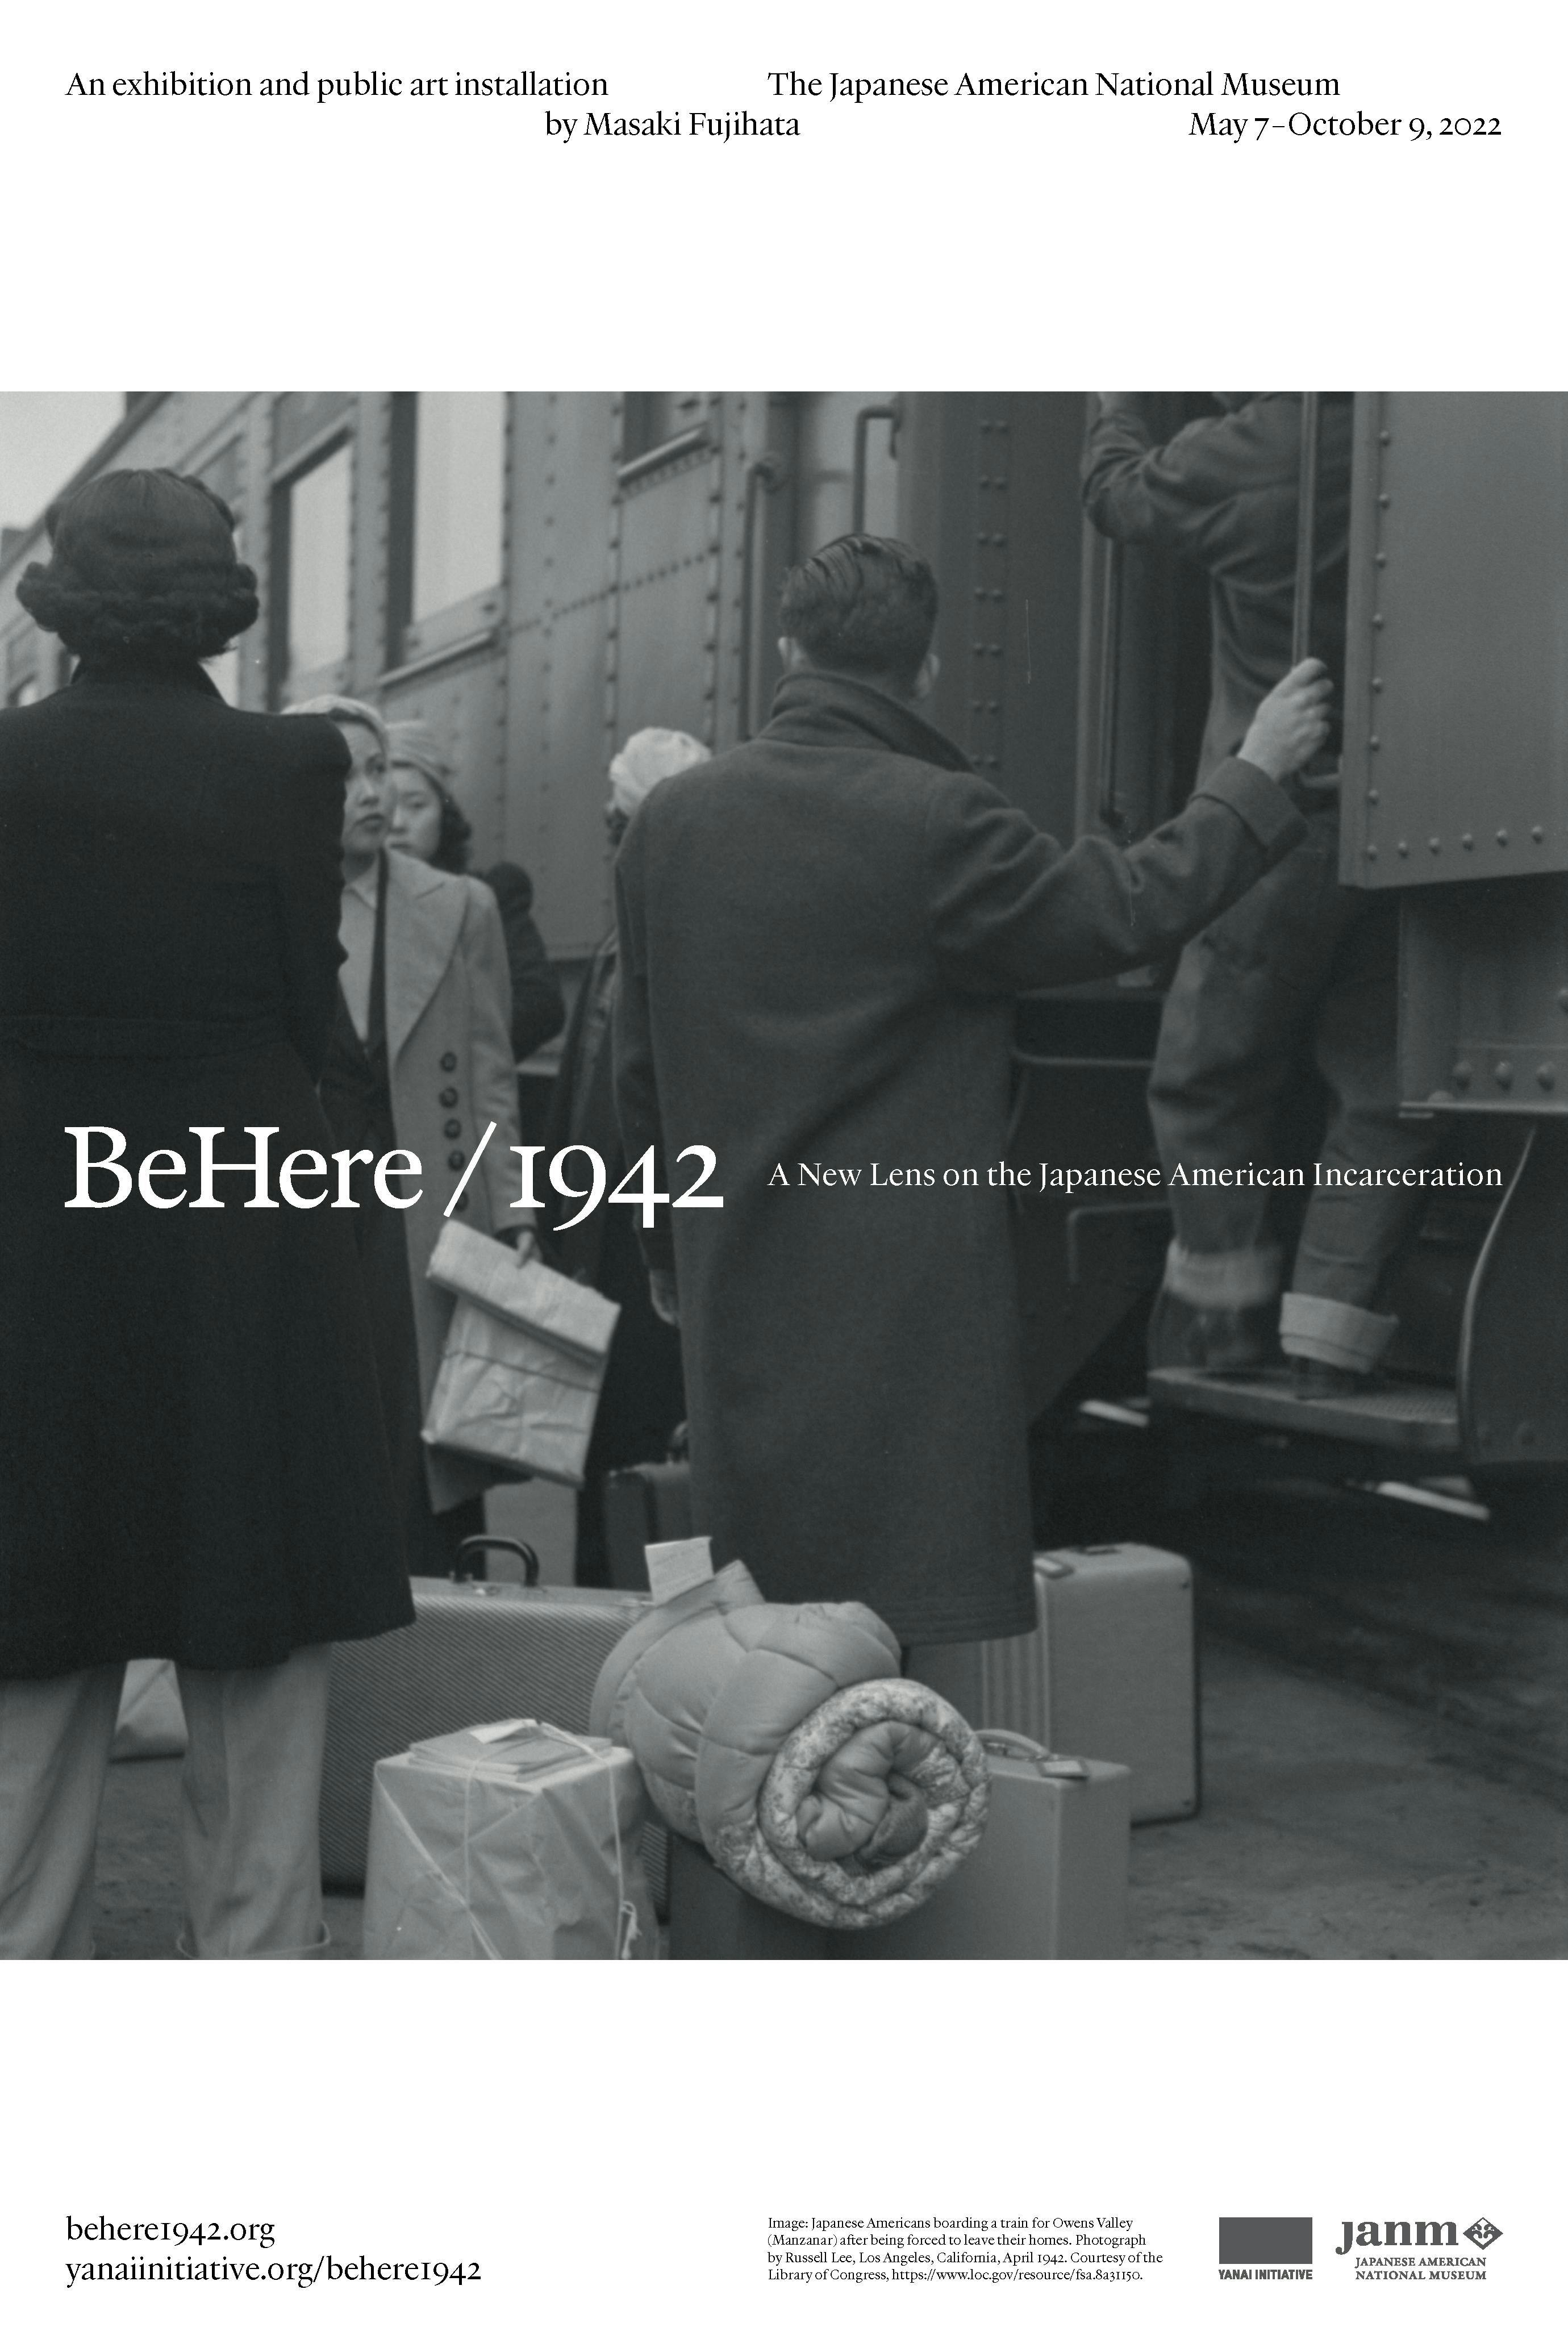 BeHere / 1942: A New Lens on the Japanese American Incarceration